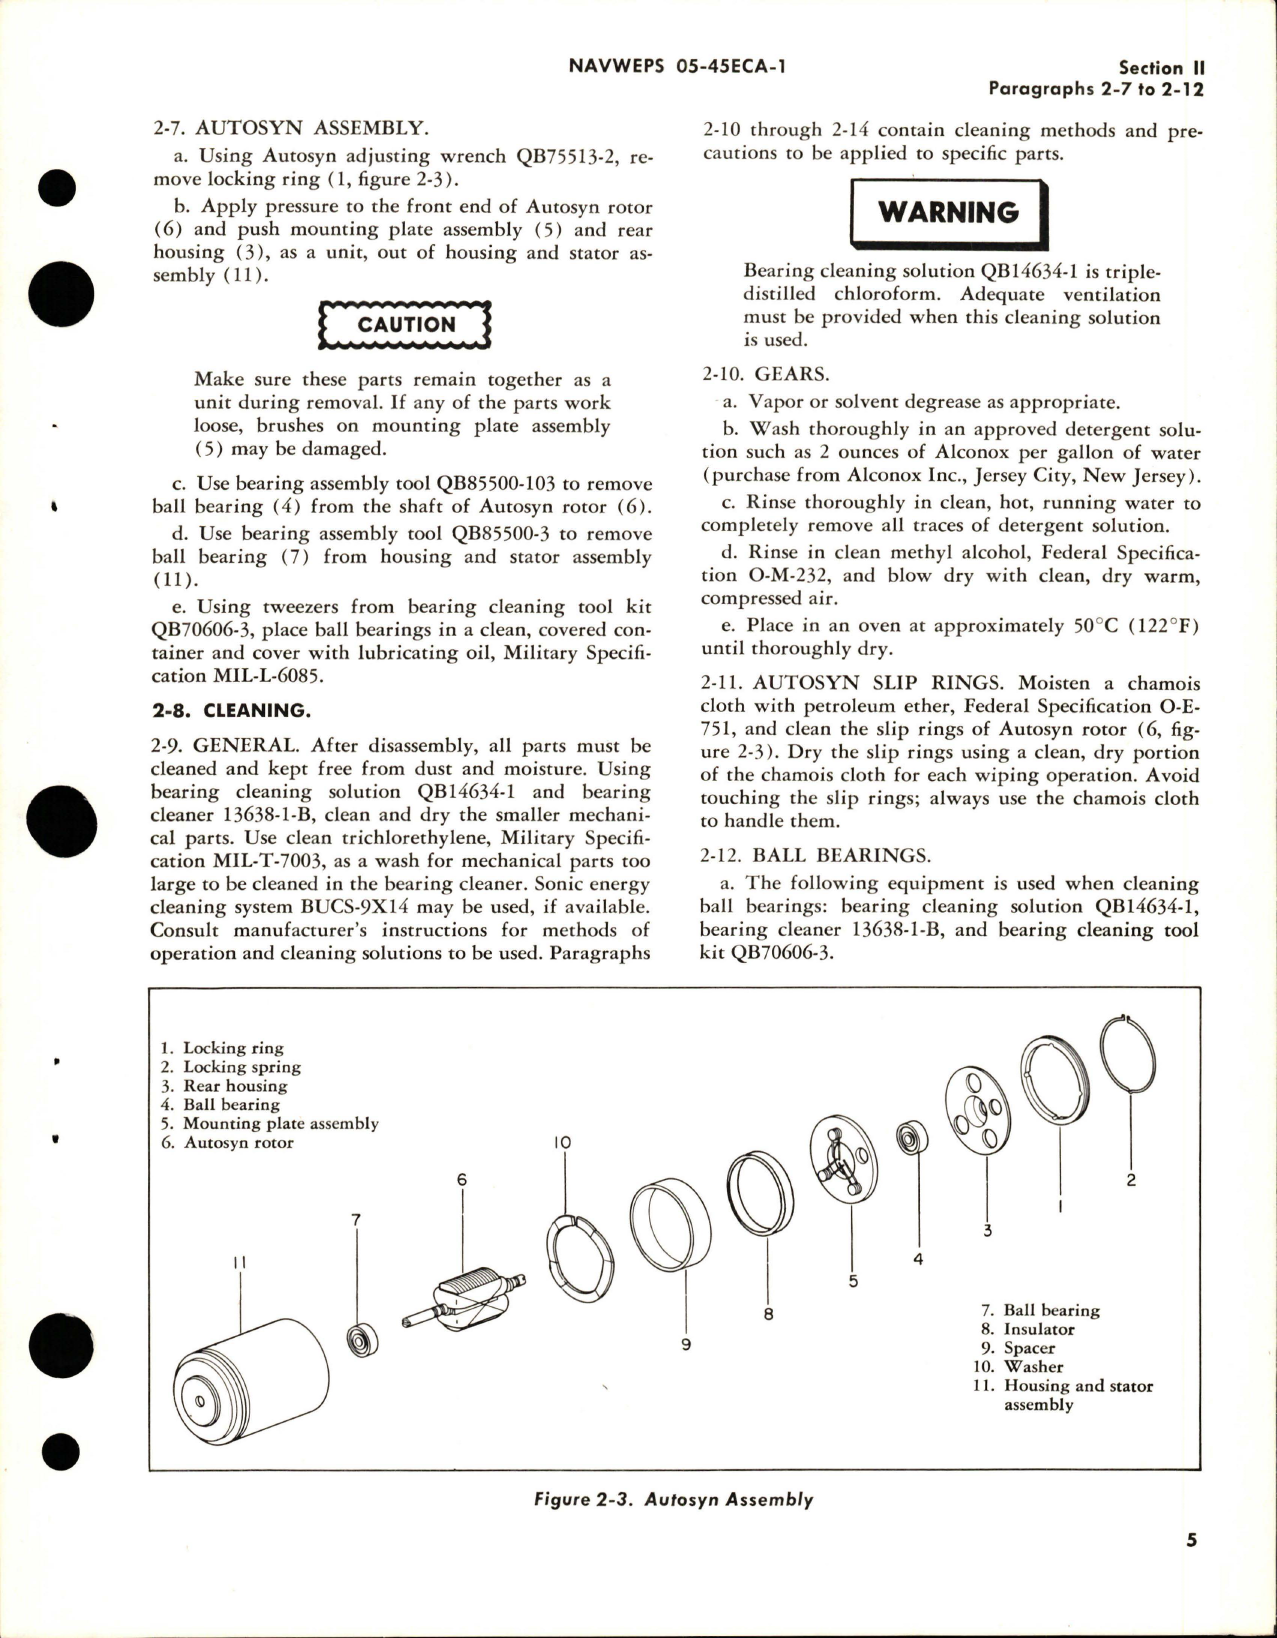 Sample page 9 from AirCorps Library document: Overhaul Instructions for Longitudinal Servo - Parts 16709-1E and 16731-1A